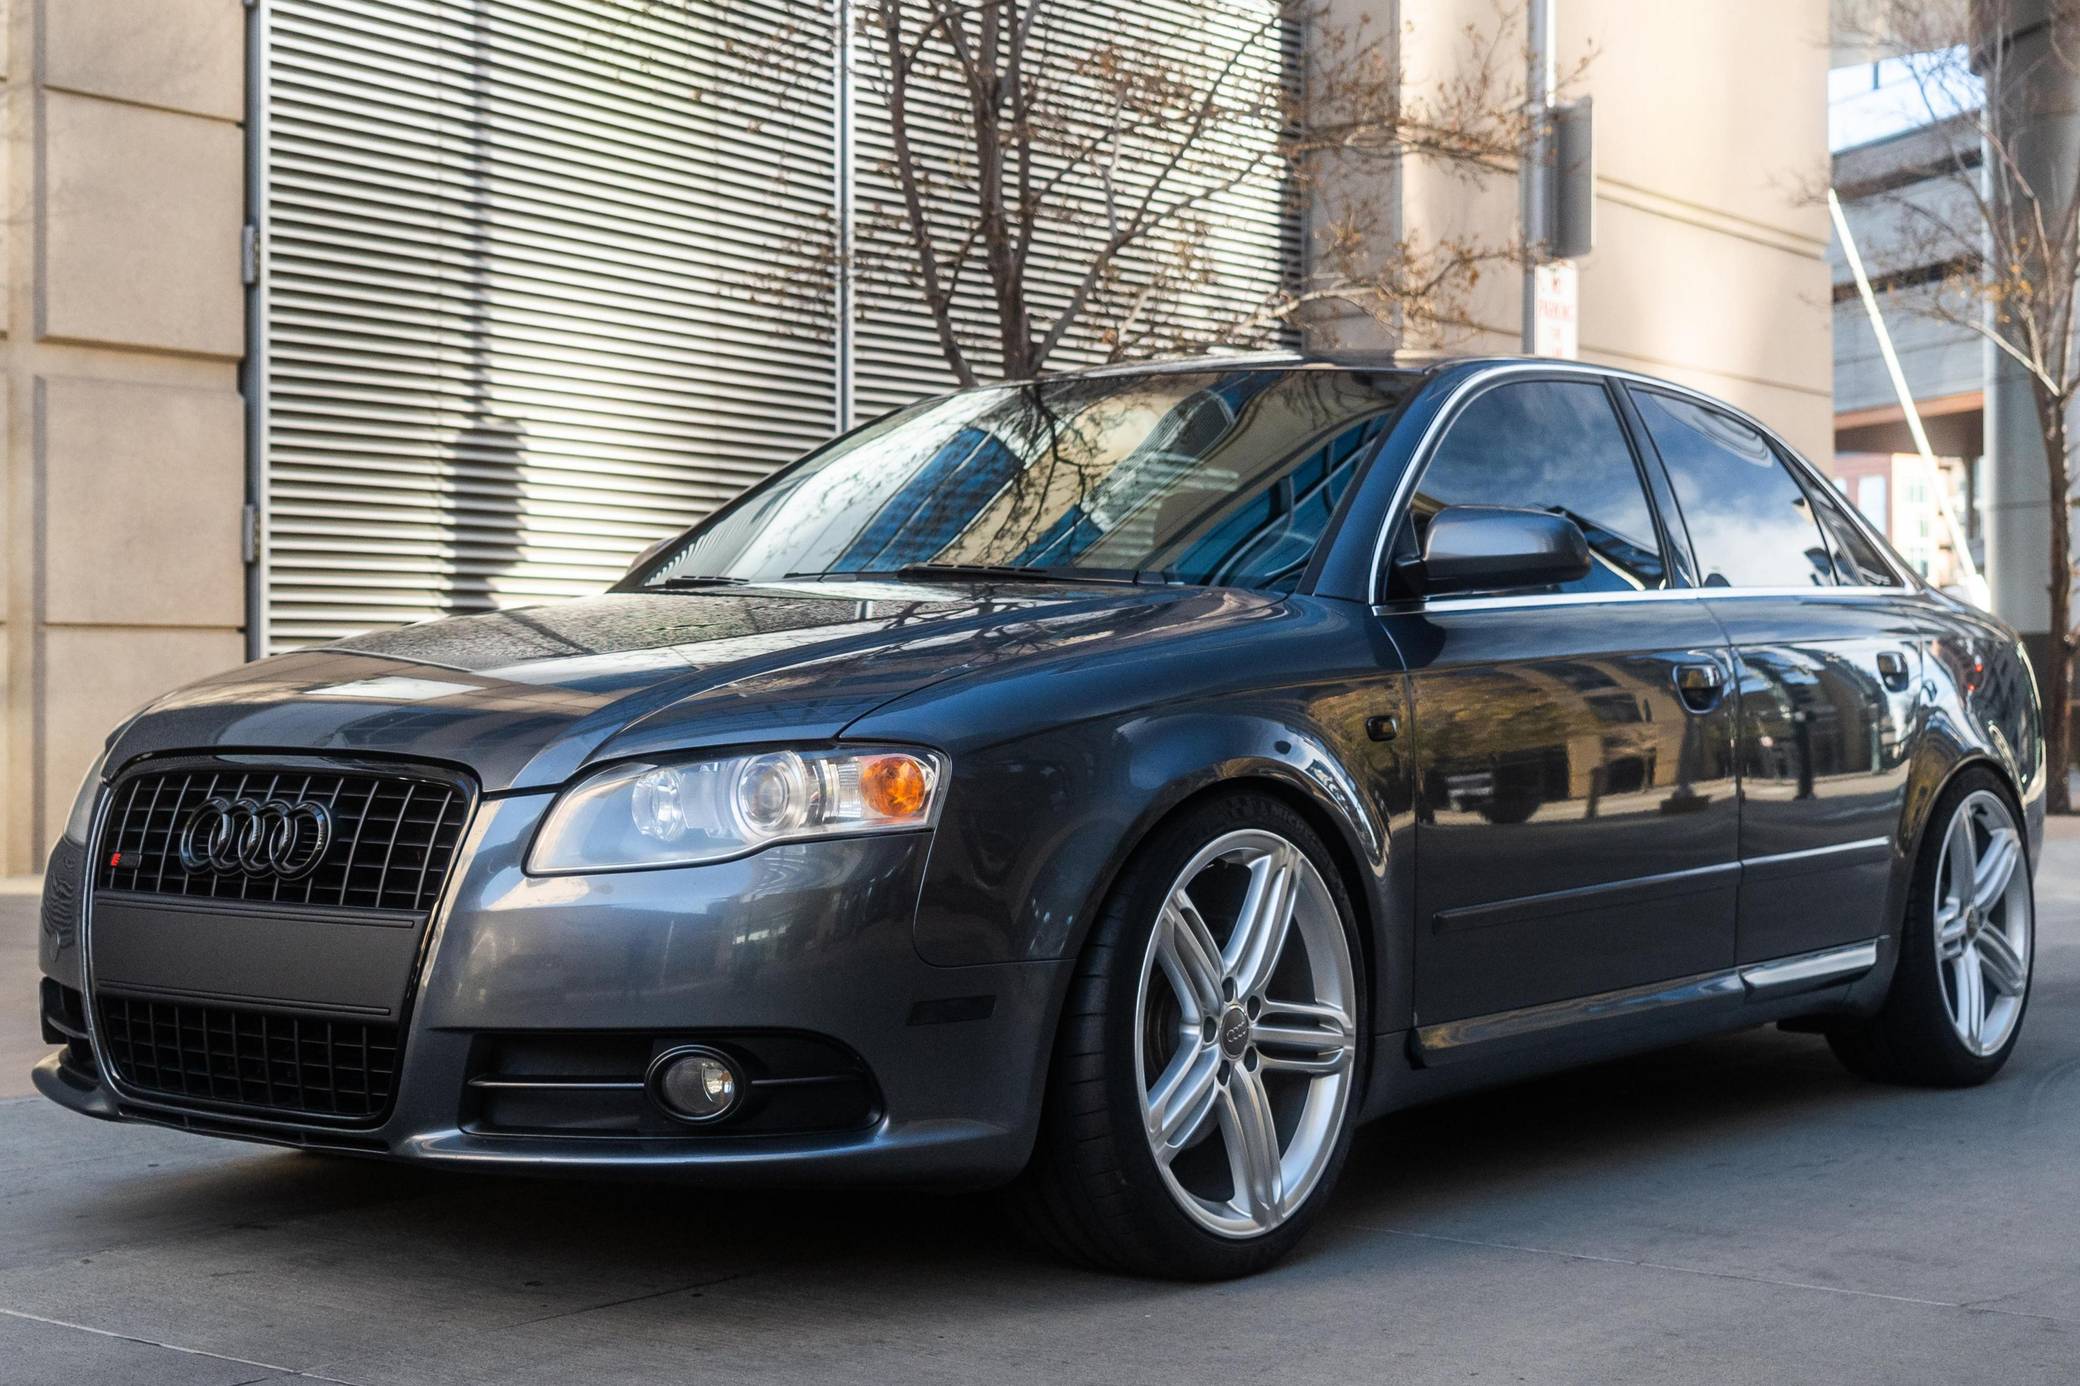 Buyer's Guide: B7-Generation Audi A4